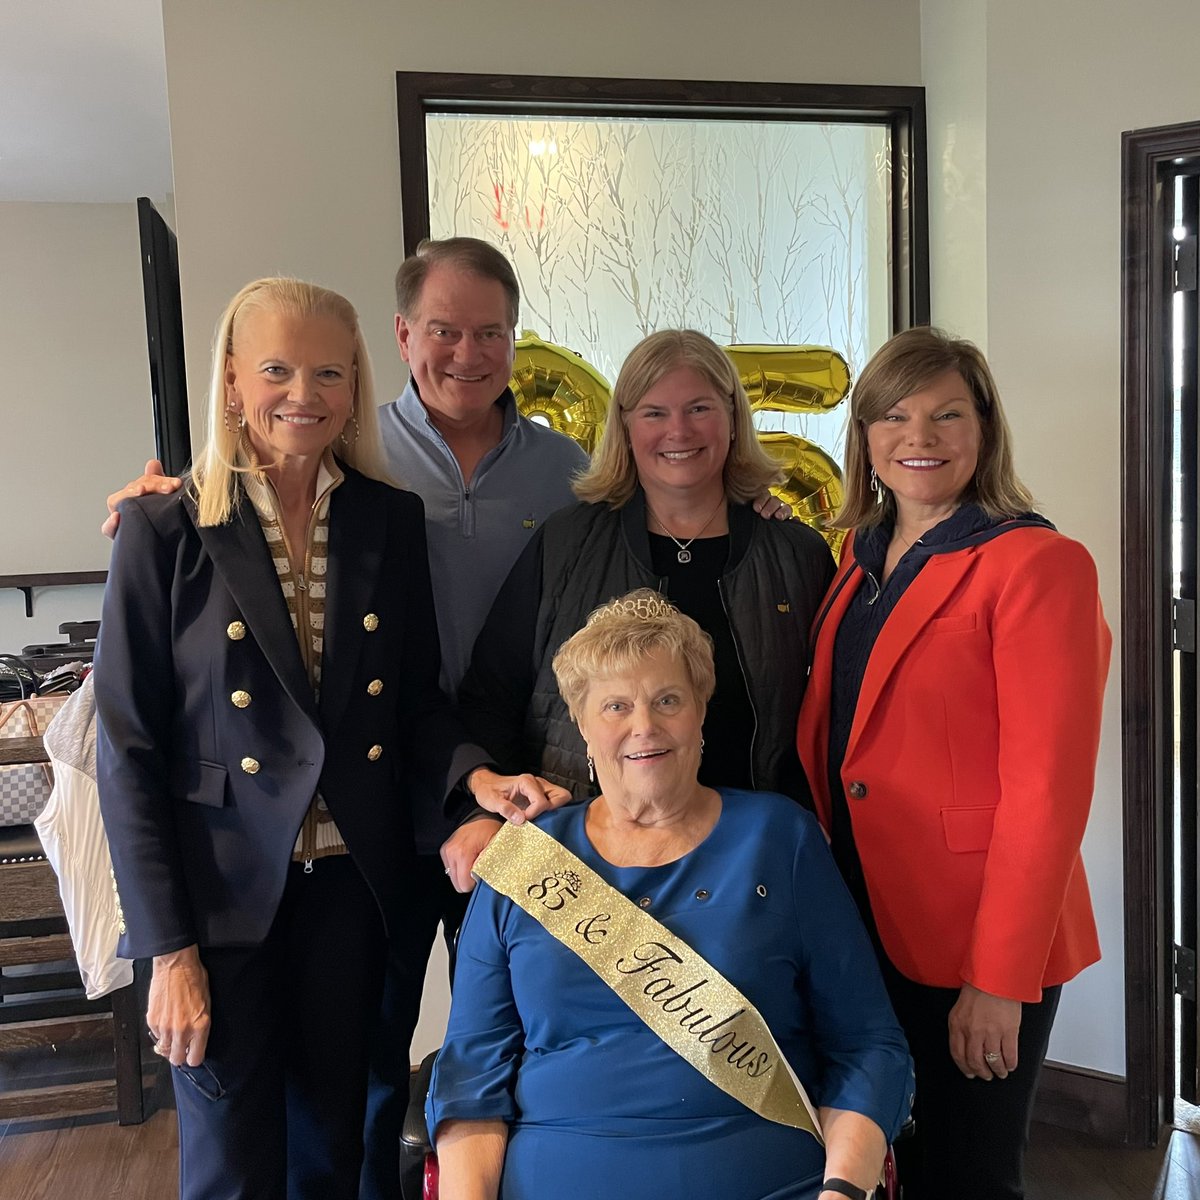 Happy Mother’s Day! For many of us, our moms are our heroes. That’s true for me & my siblings, so it was quite a scare when she became sick last year and we almost lost her. Thankfully, she fought hard, recovered, and last month our family gathered to celebrate her 85th birthday.